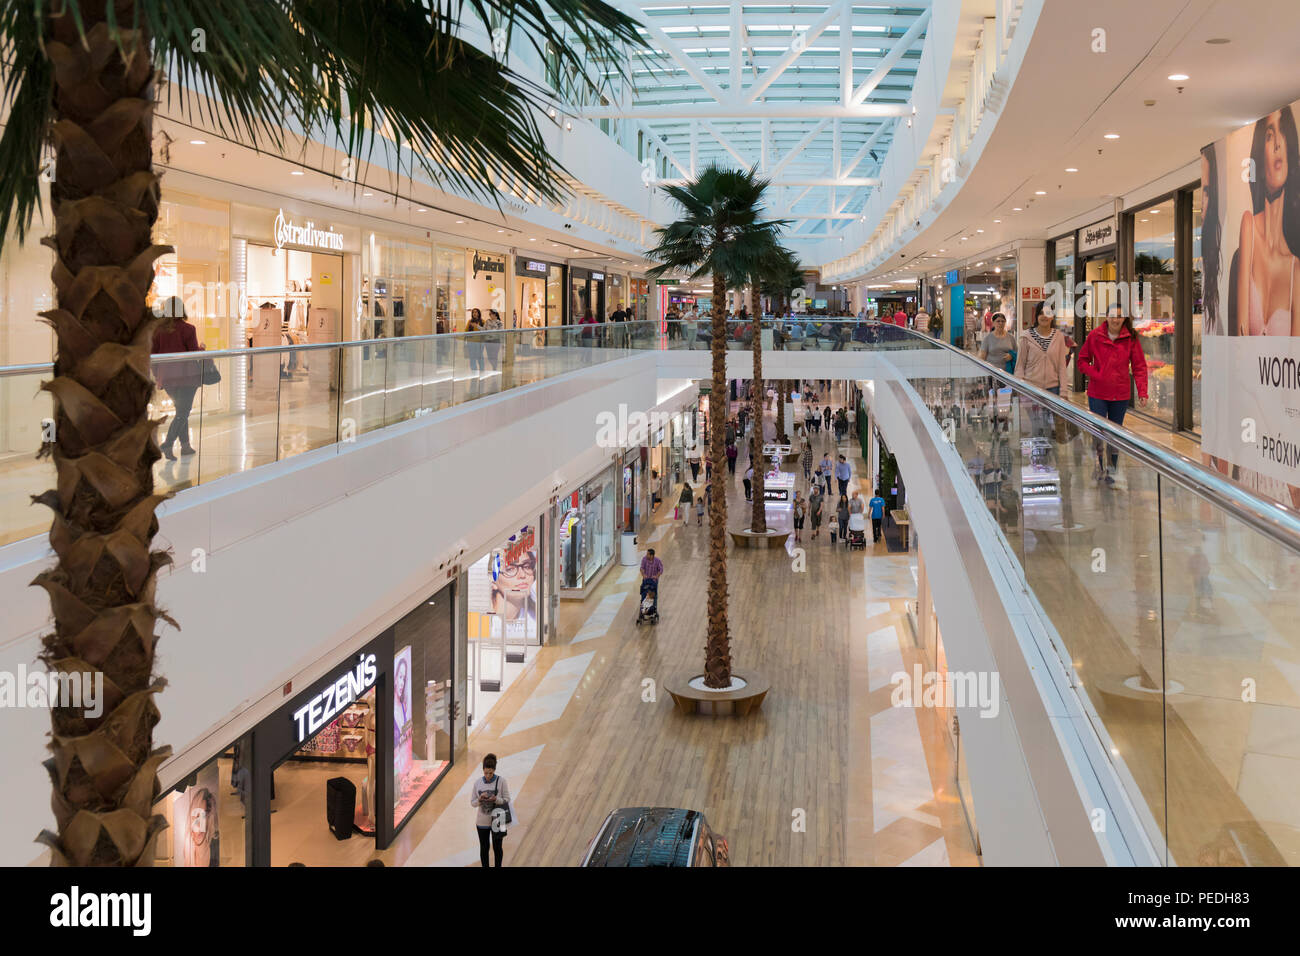 Miramar Shopping Centre High Resolution Stock Photography and Images - Alamy